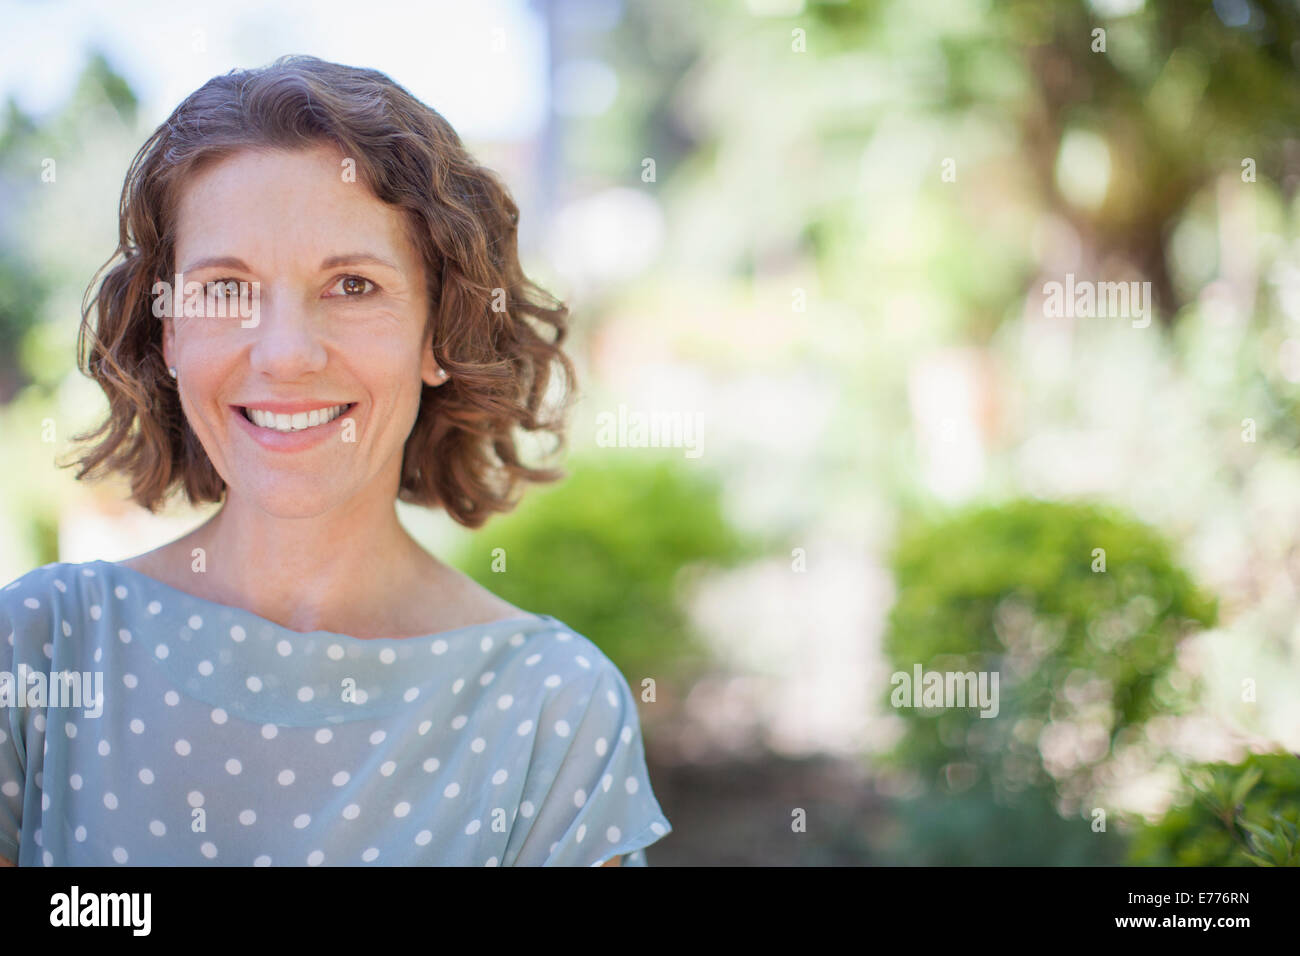 Older woman smiling outdoors Stock Photo